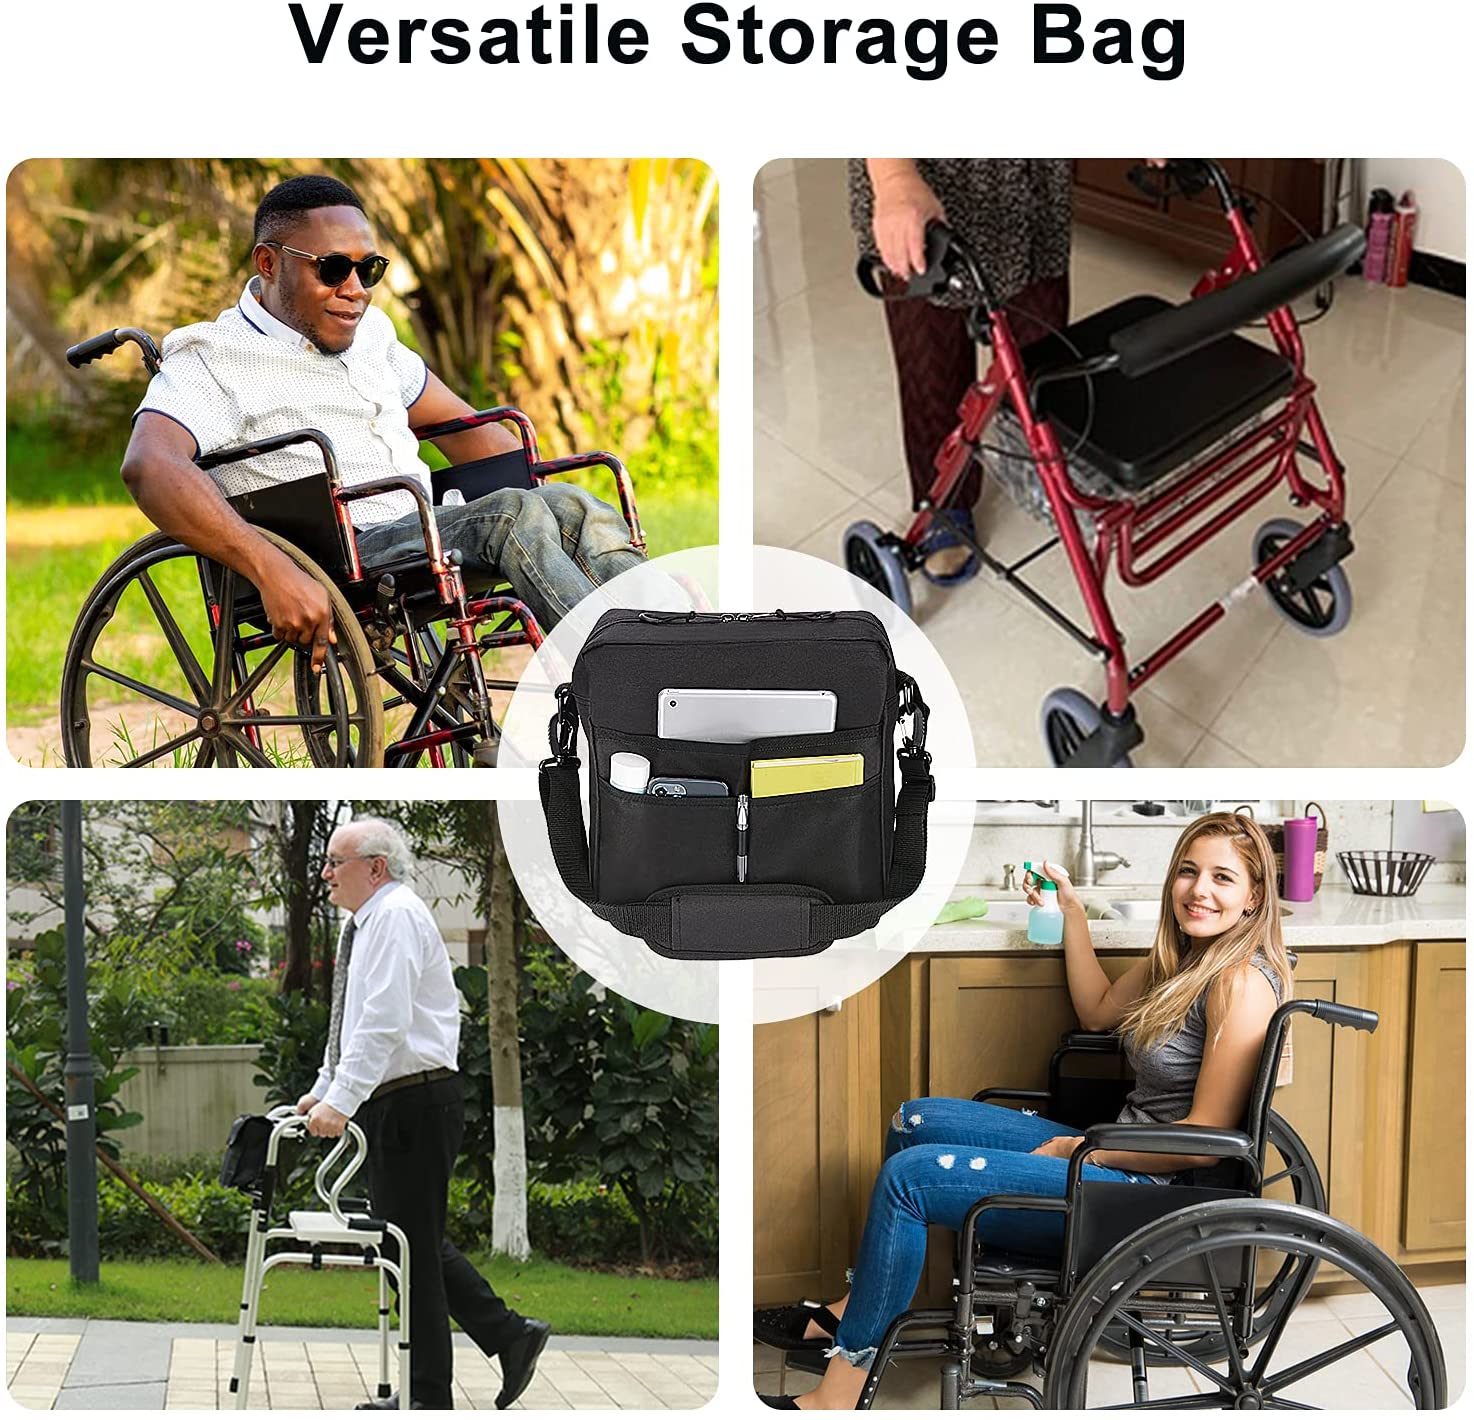 Deluxe Down Under Wheelchair Bags on Sale with Low Price Match Promise